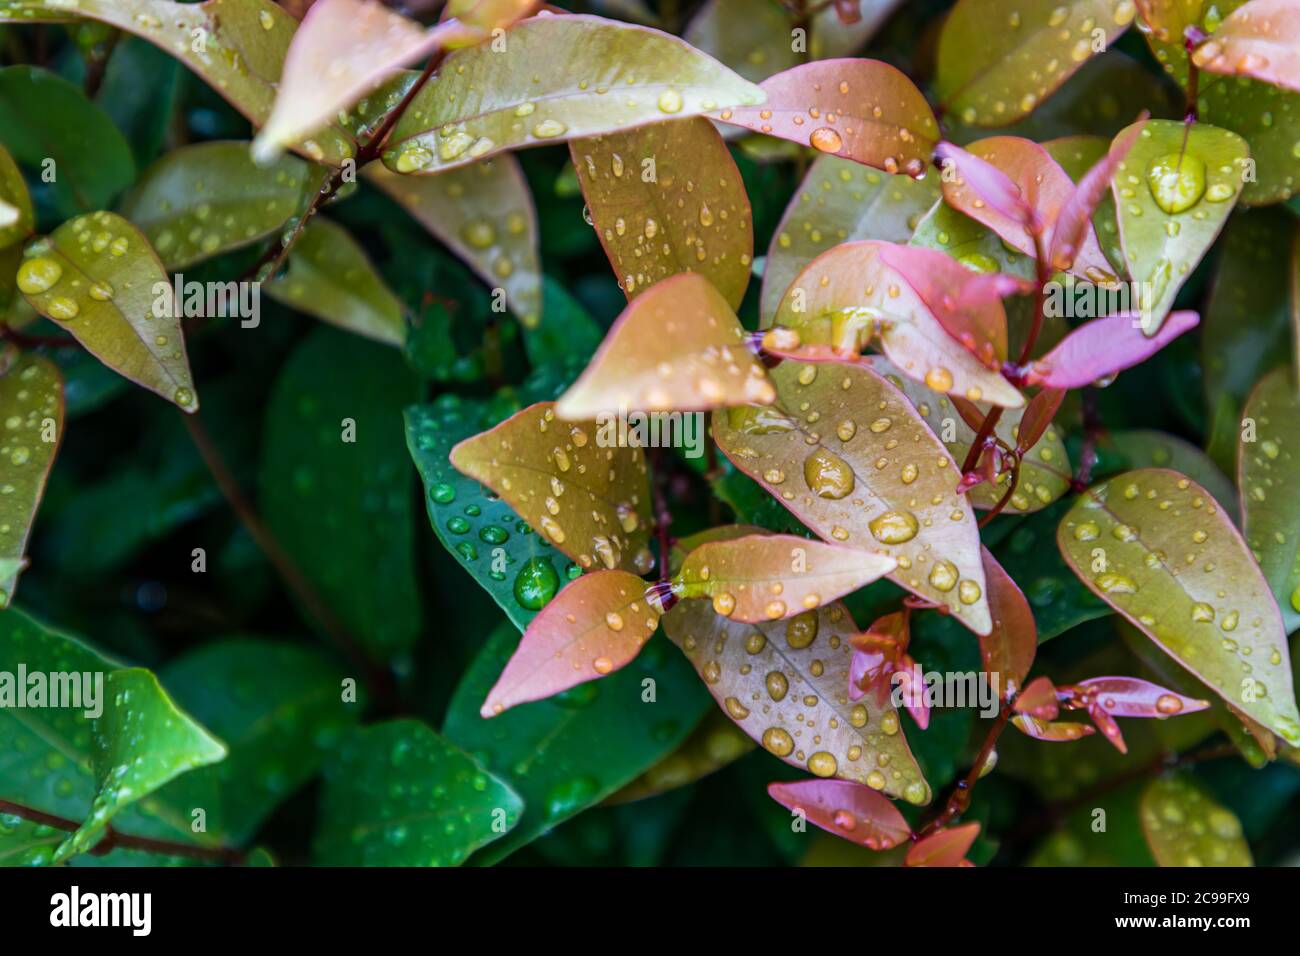 Water drops on Red leaf photinia of Photinia glabra Robin. Flower's leaves beautifully blooming in garden. Selective focus. Stock Photo